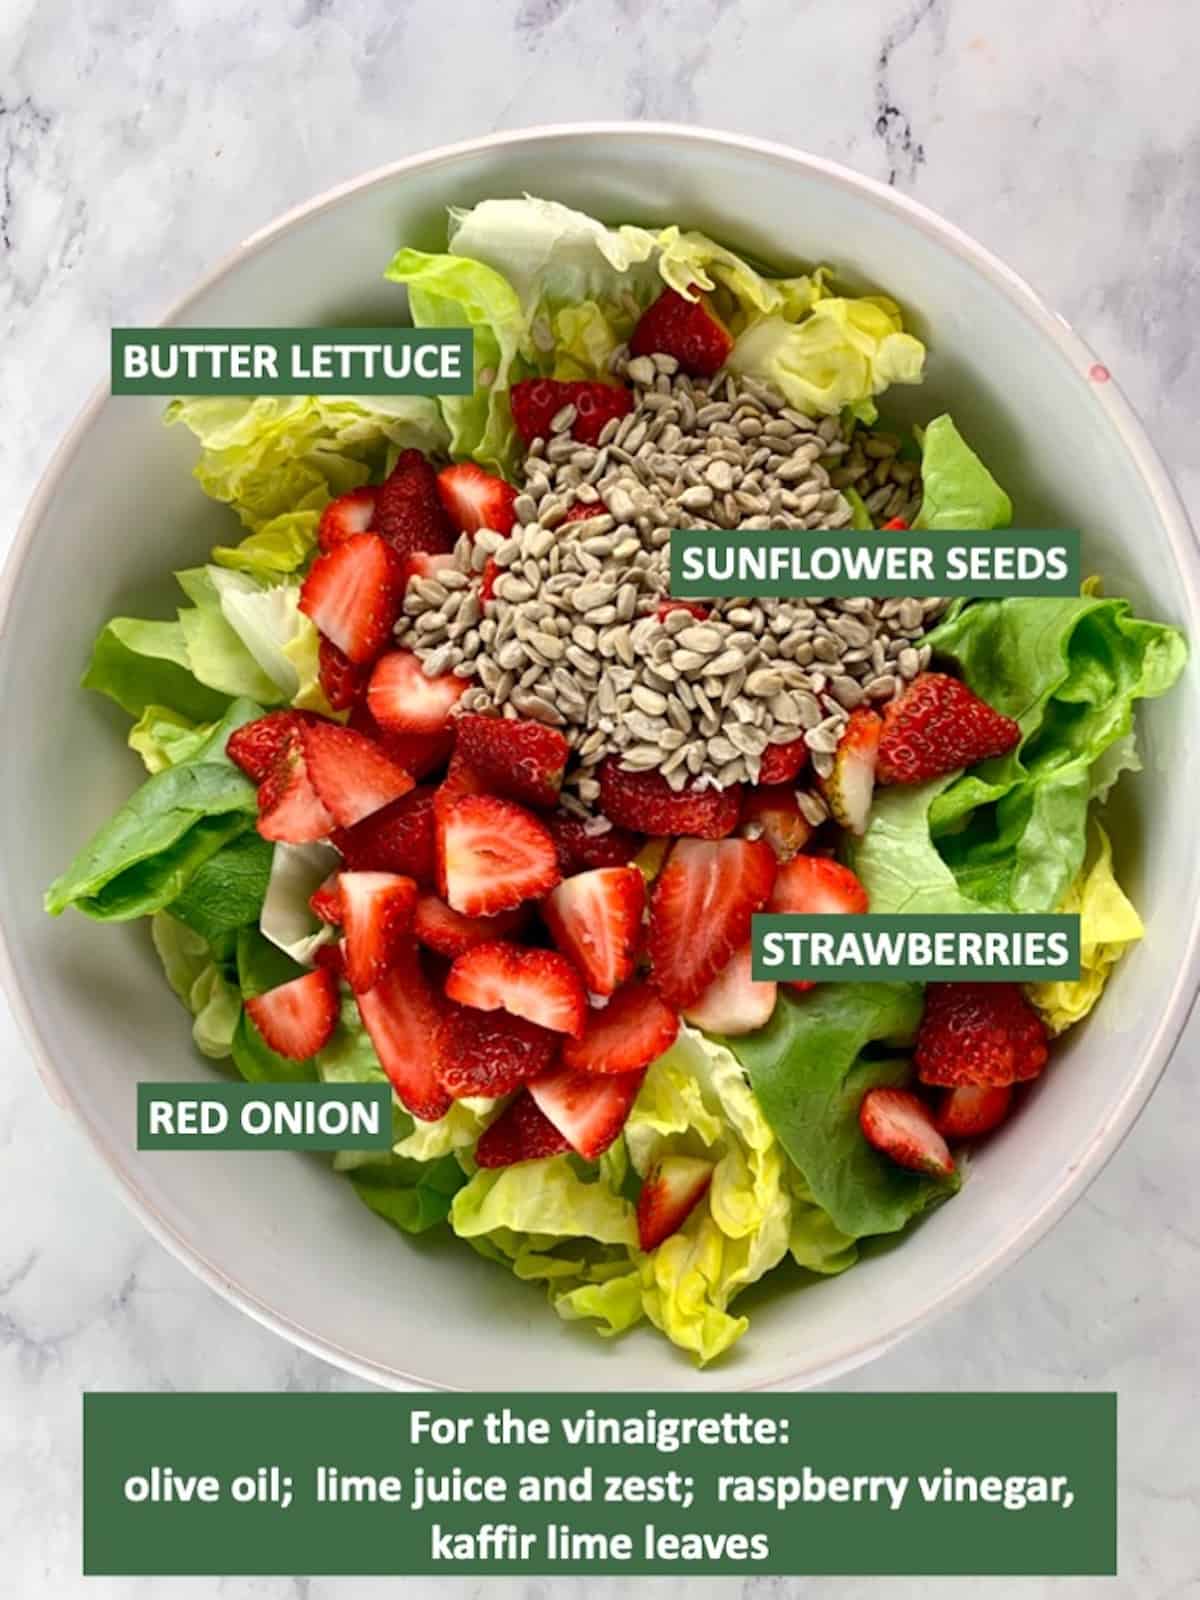 Labelled ingredients needed to make lettuce salad with strawberries.